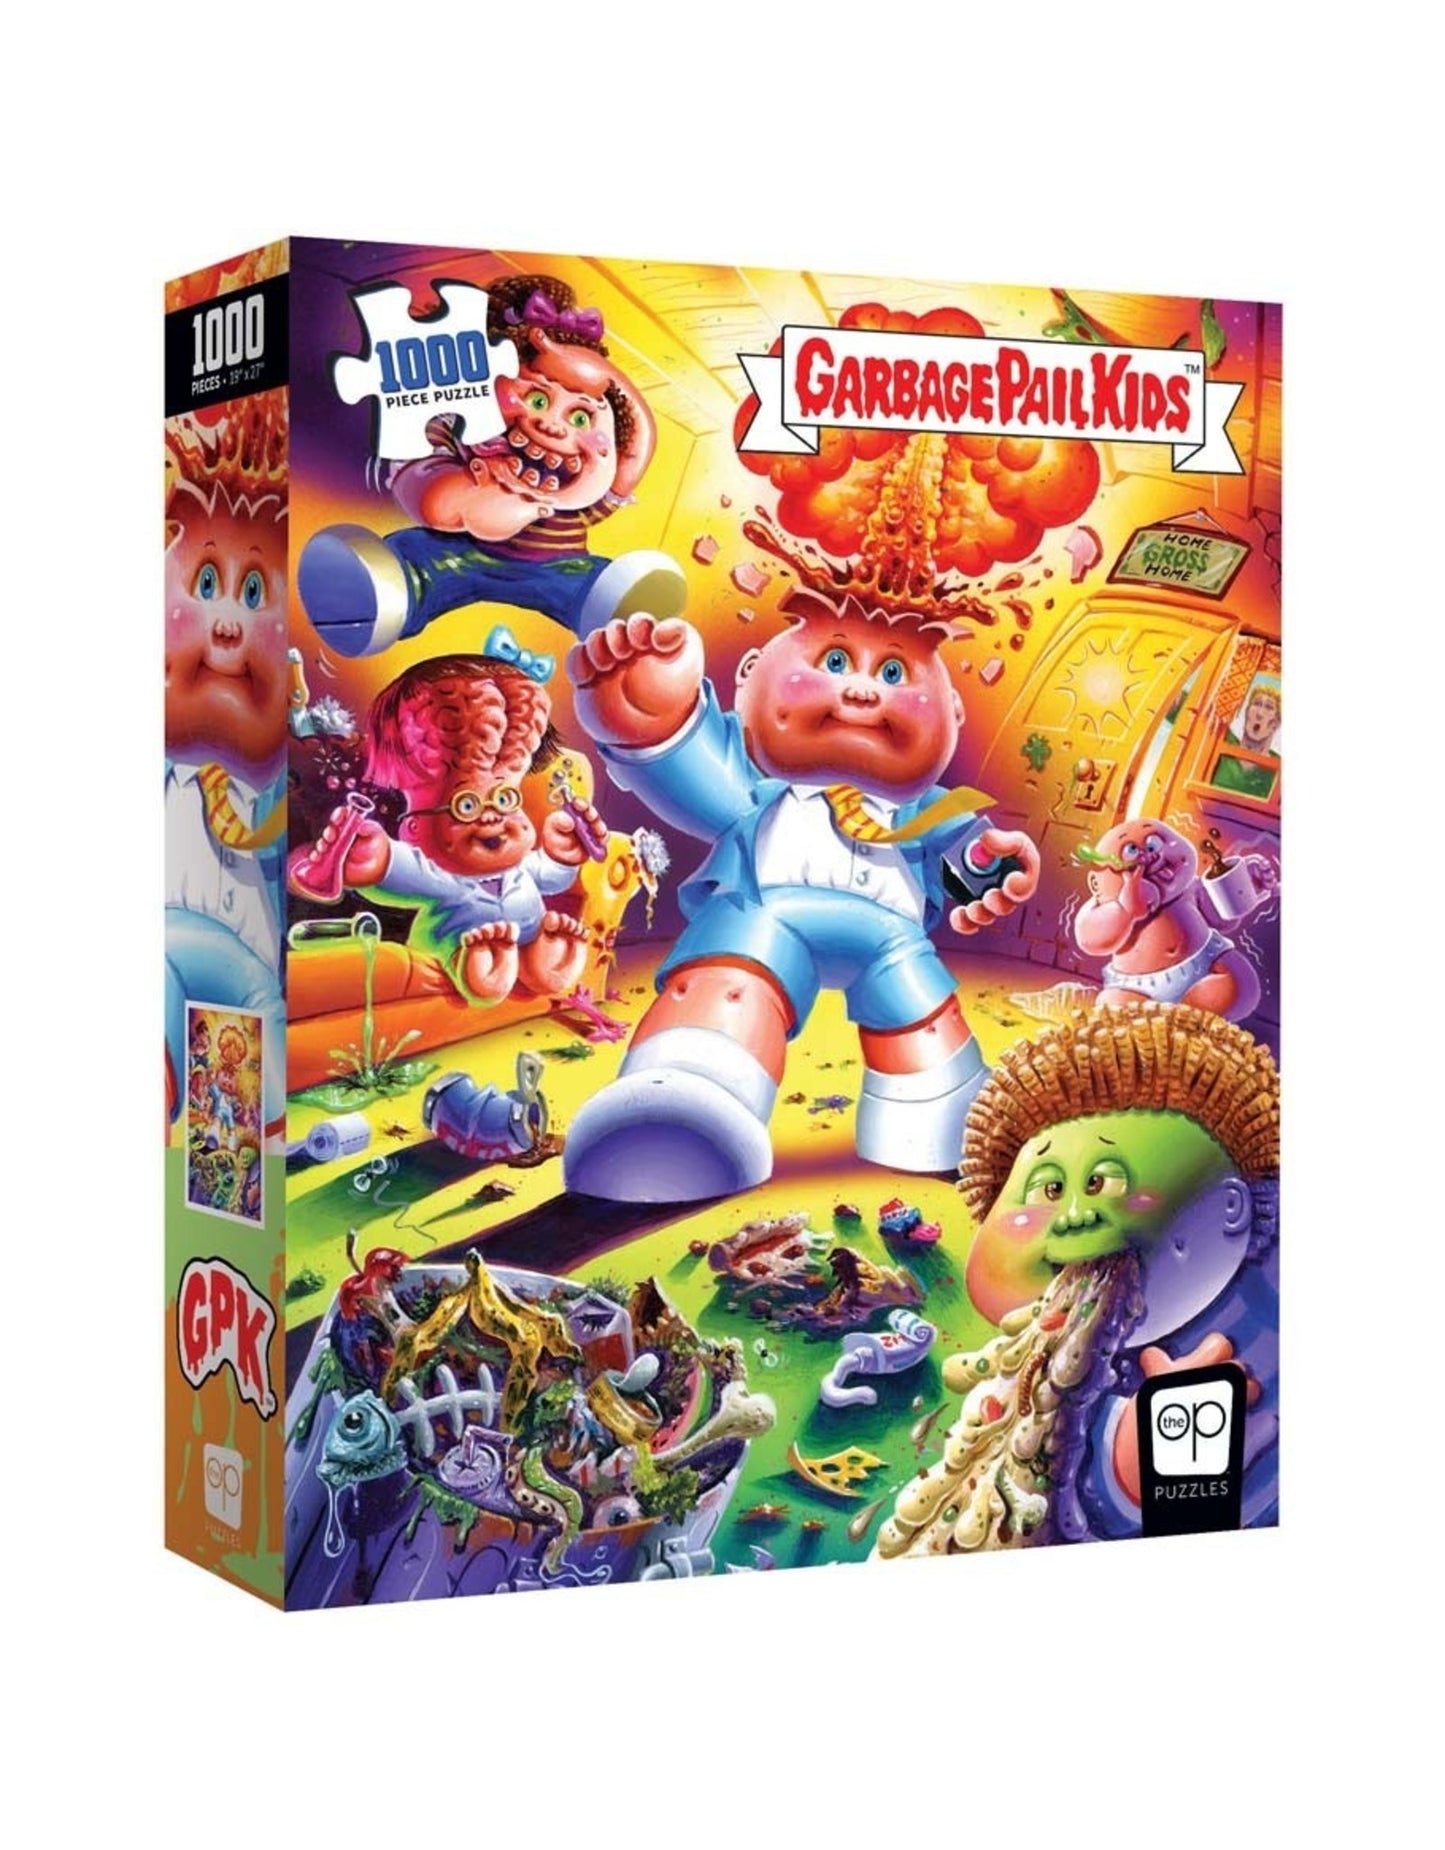 Garbage Pail Kids - Home Gross Home, 1000 Piece Puzzle